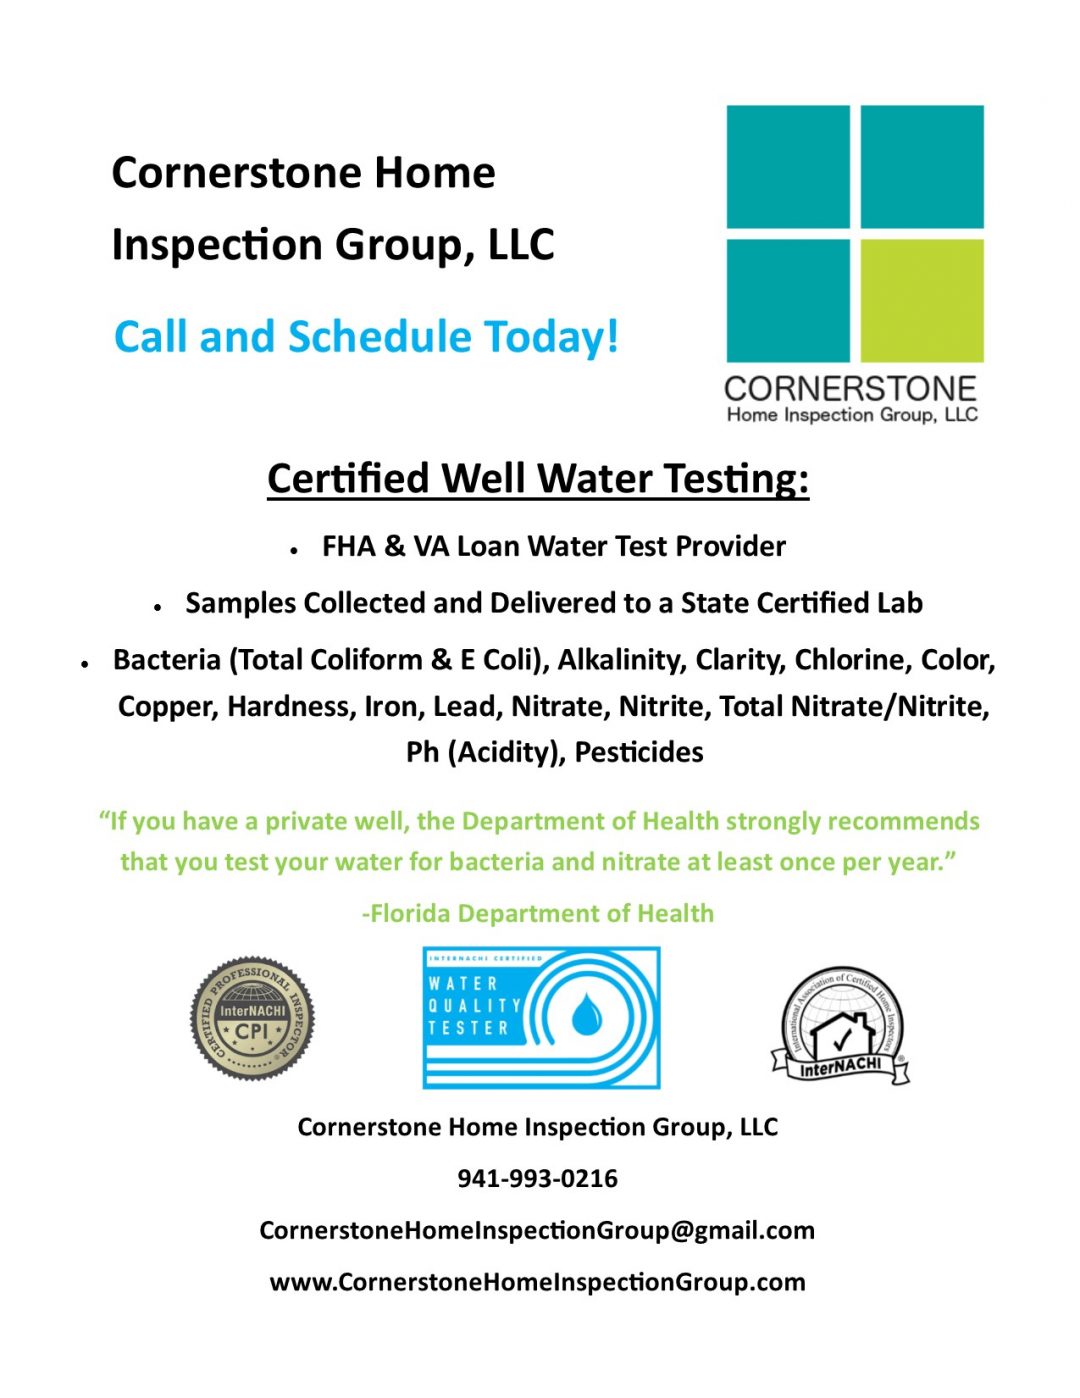 certified-well-water-testing-cornerstone-home-inspection-group-llc